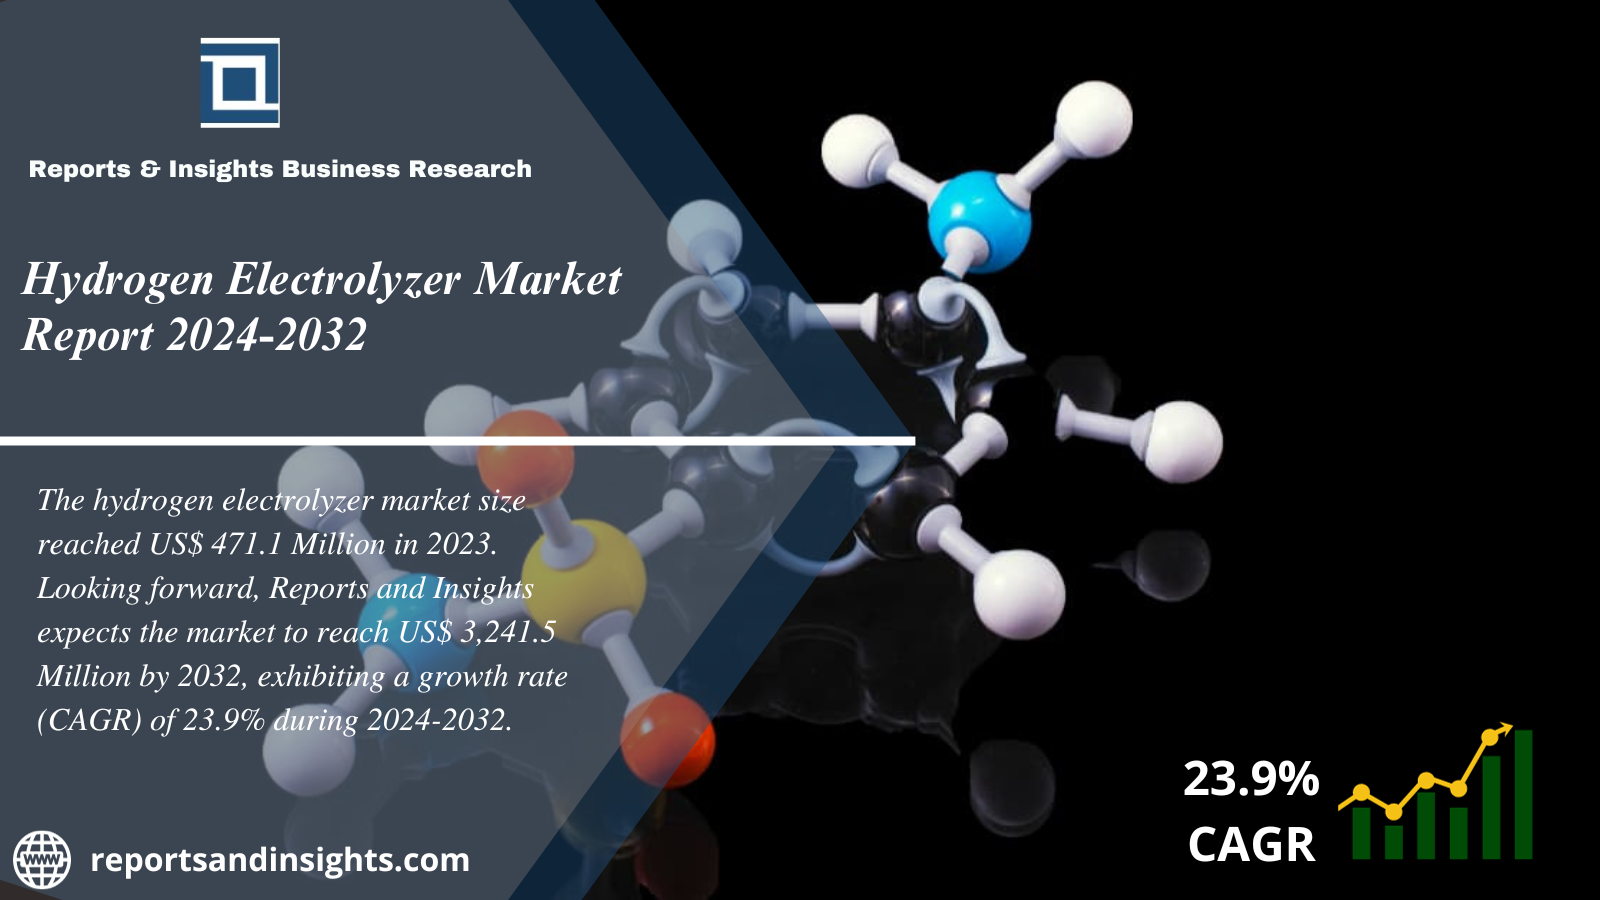 Hydrogen Electrolyzer Market 2024-2032: Trends, Size, Share, Growth and Leading Key Players